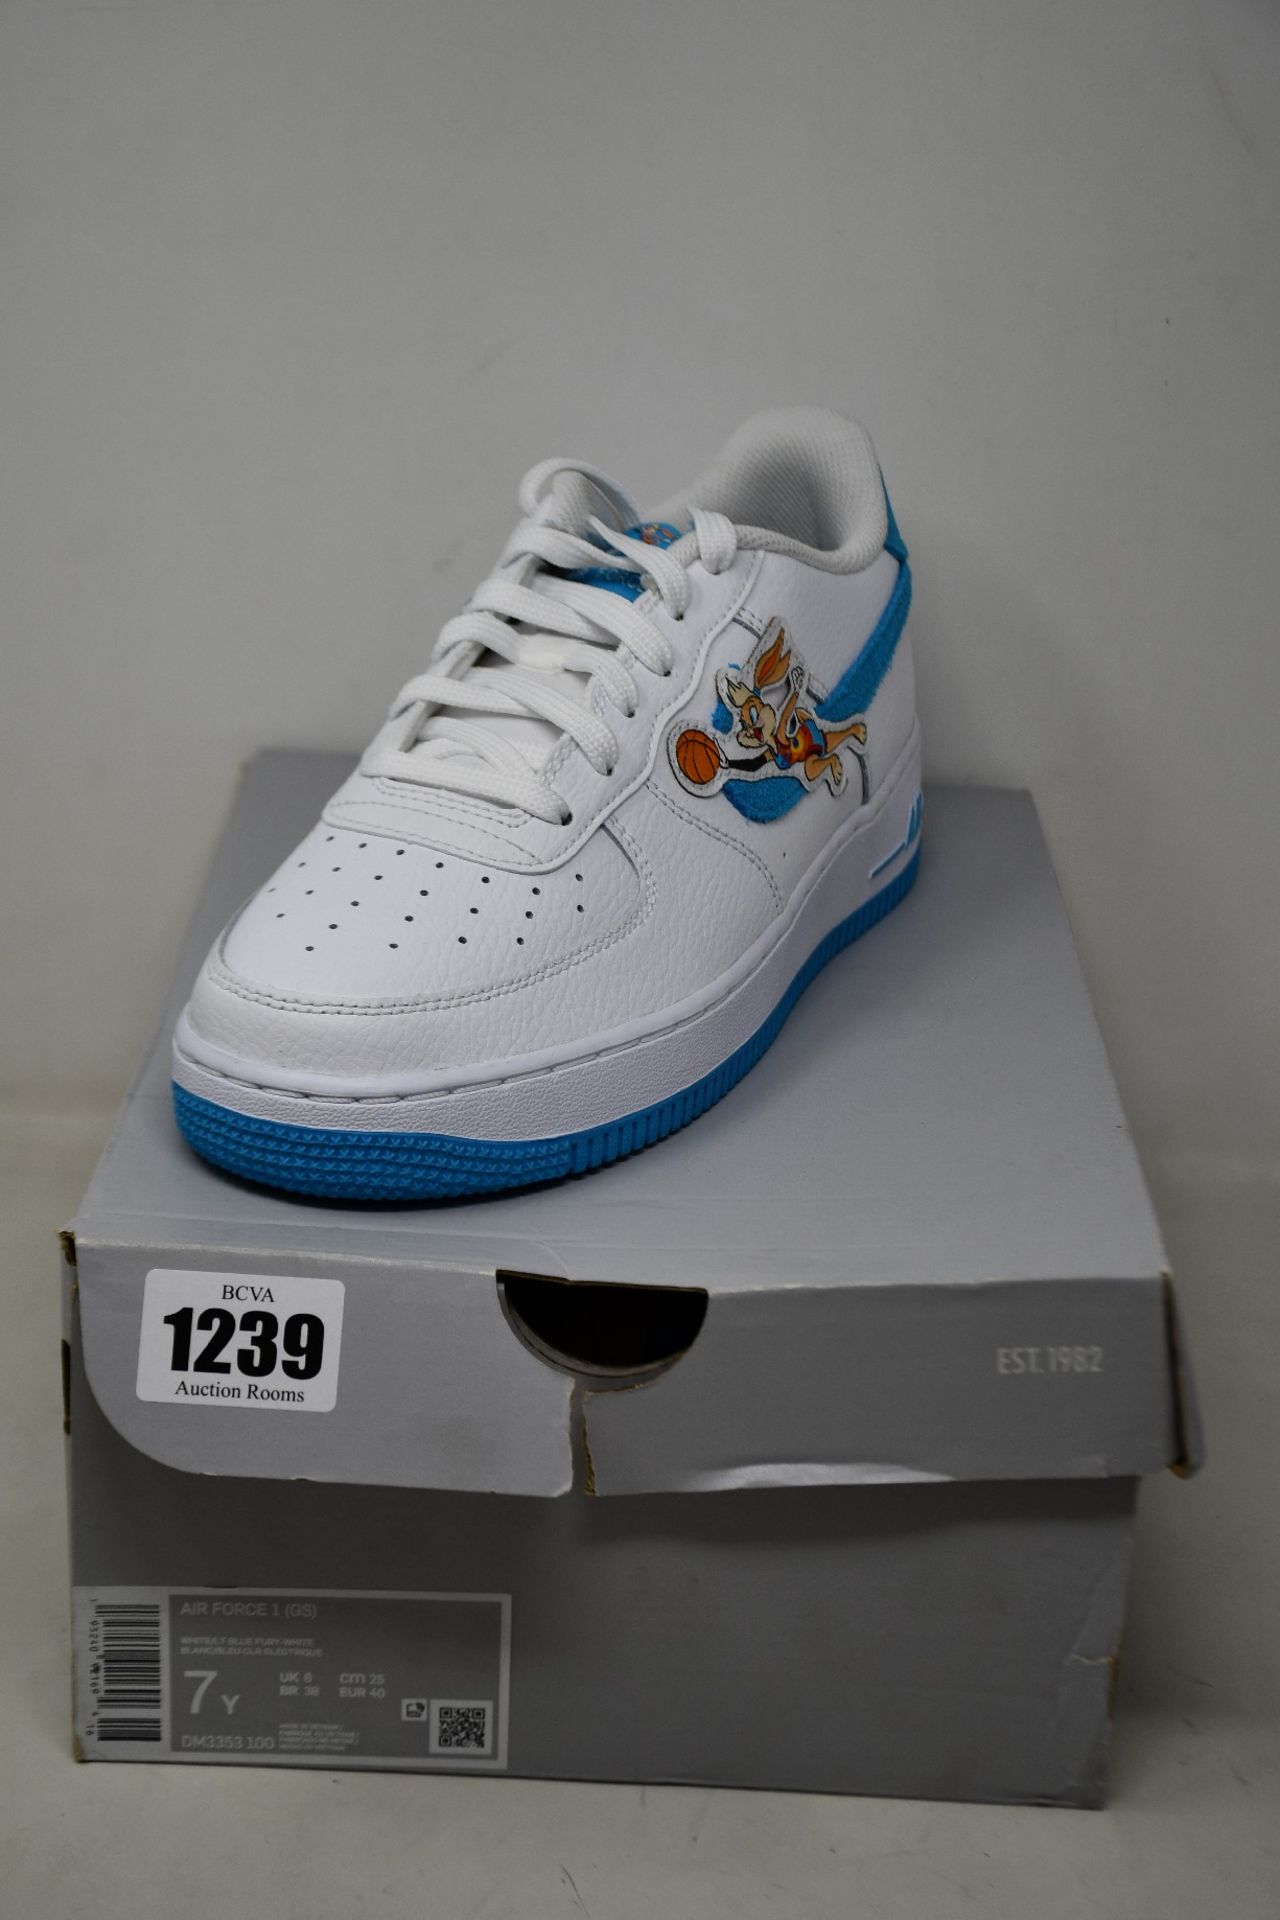 A pair of youths as new Nike Air Force 1 GS (UK 6).